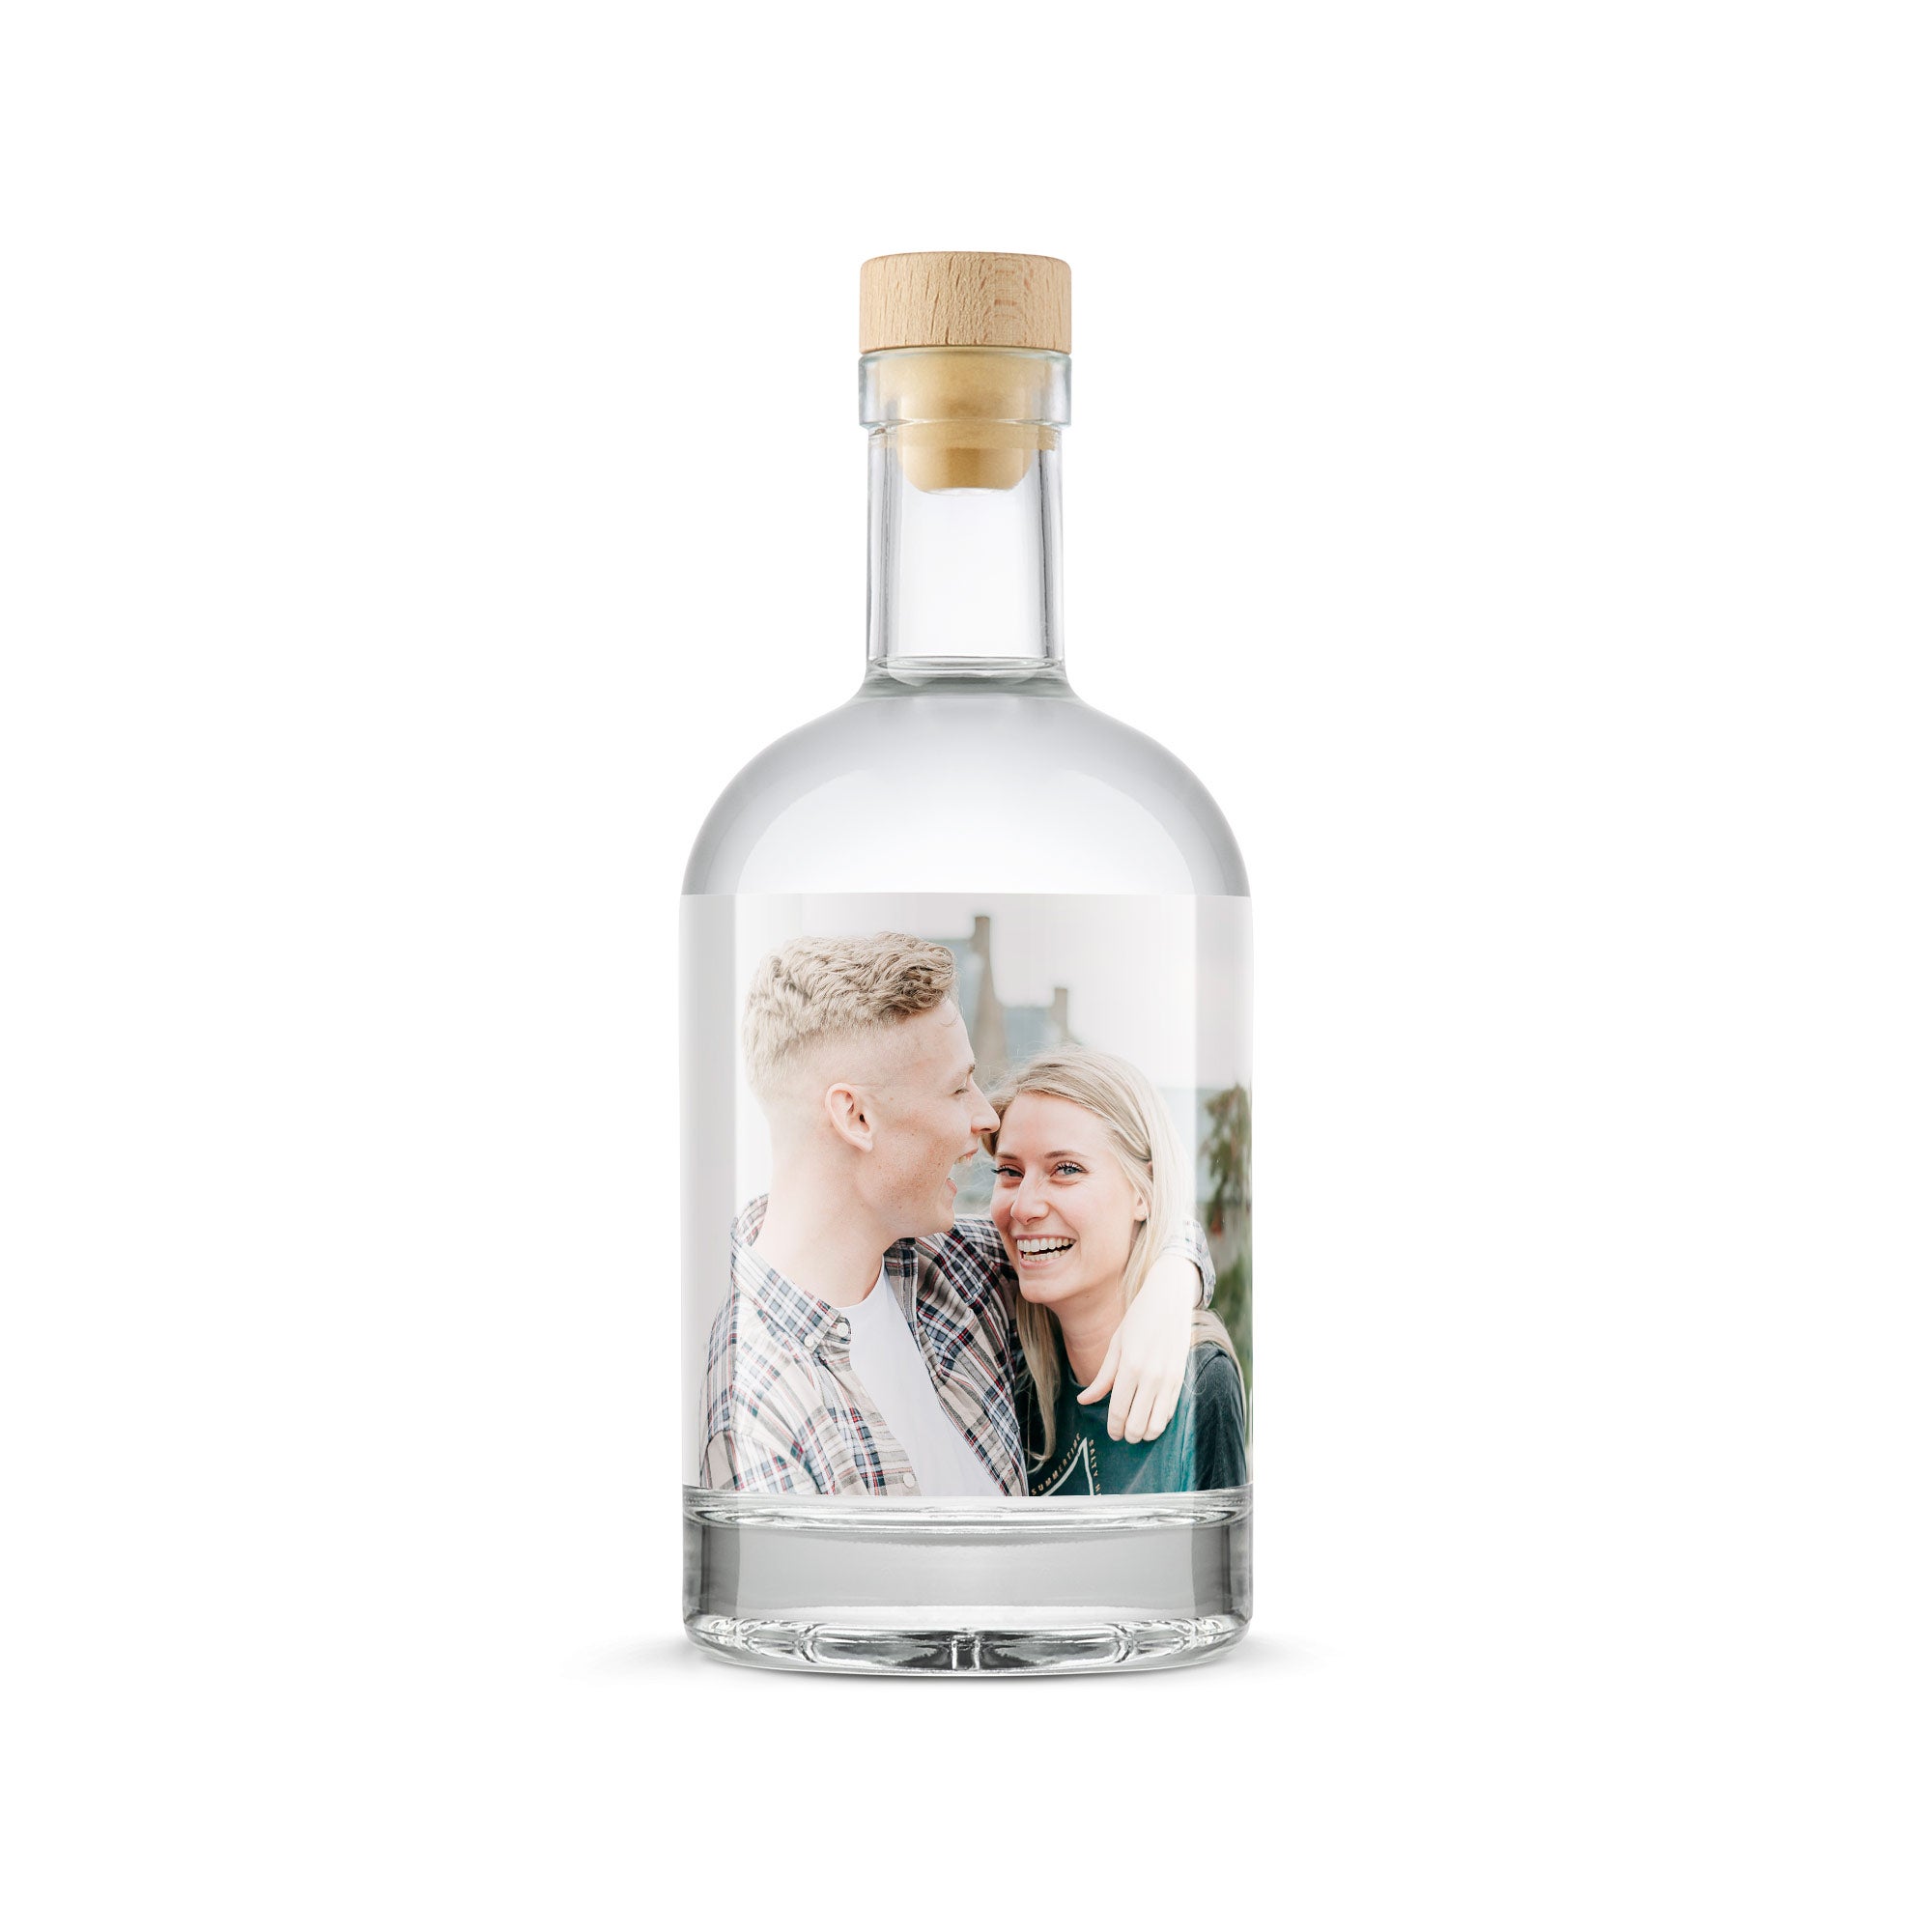 Personalised gin gift - YourSurprise - Printed label